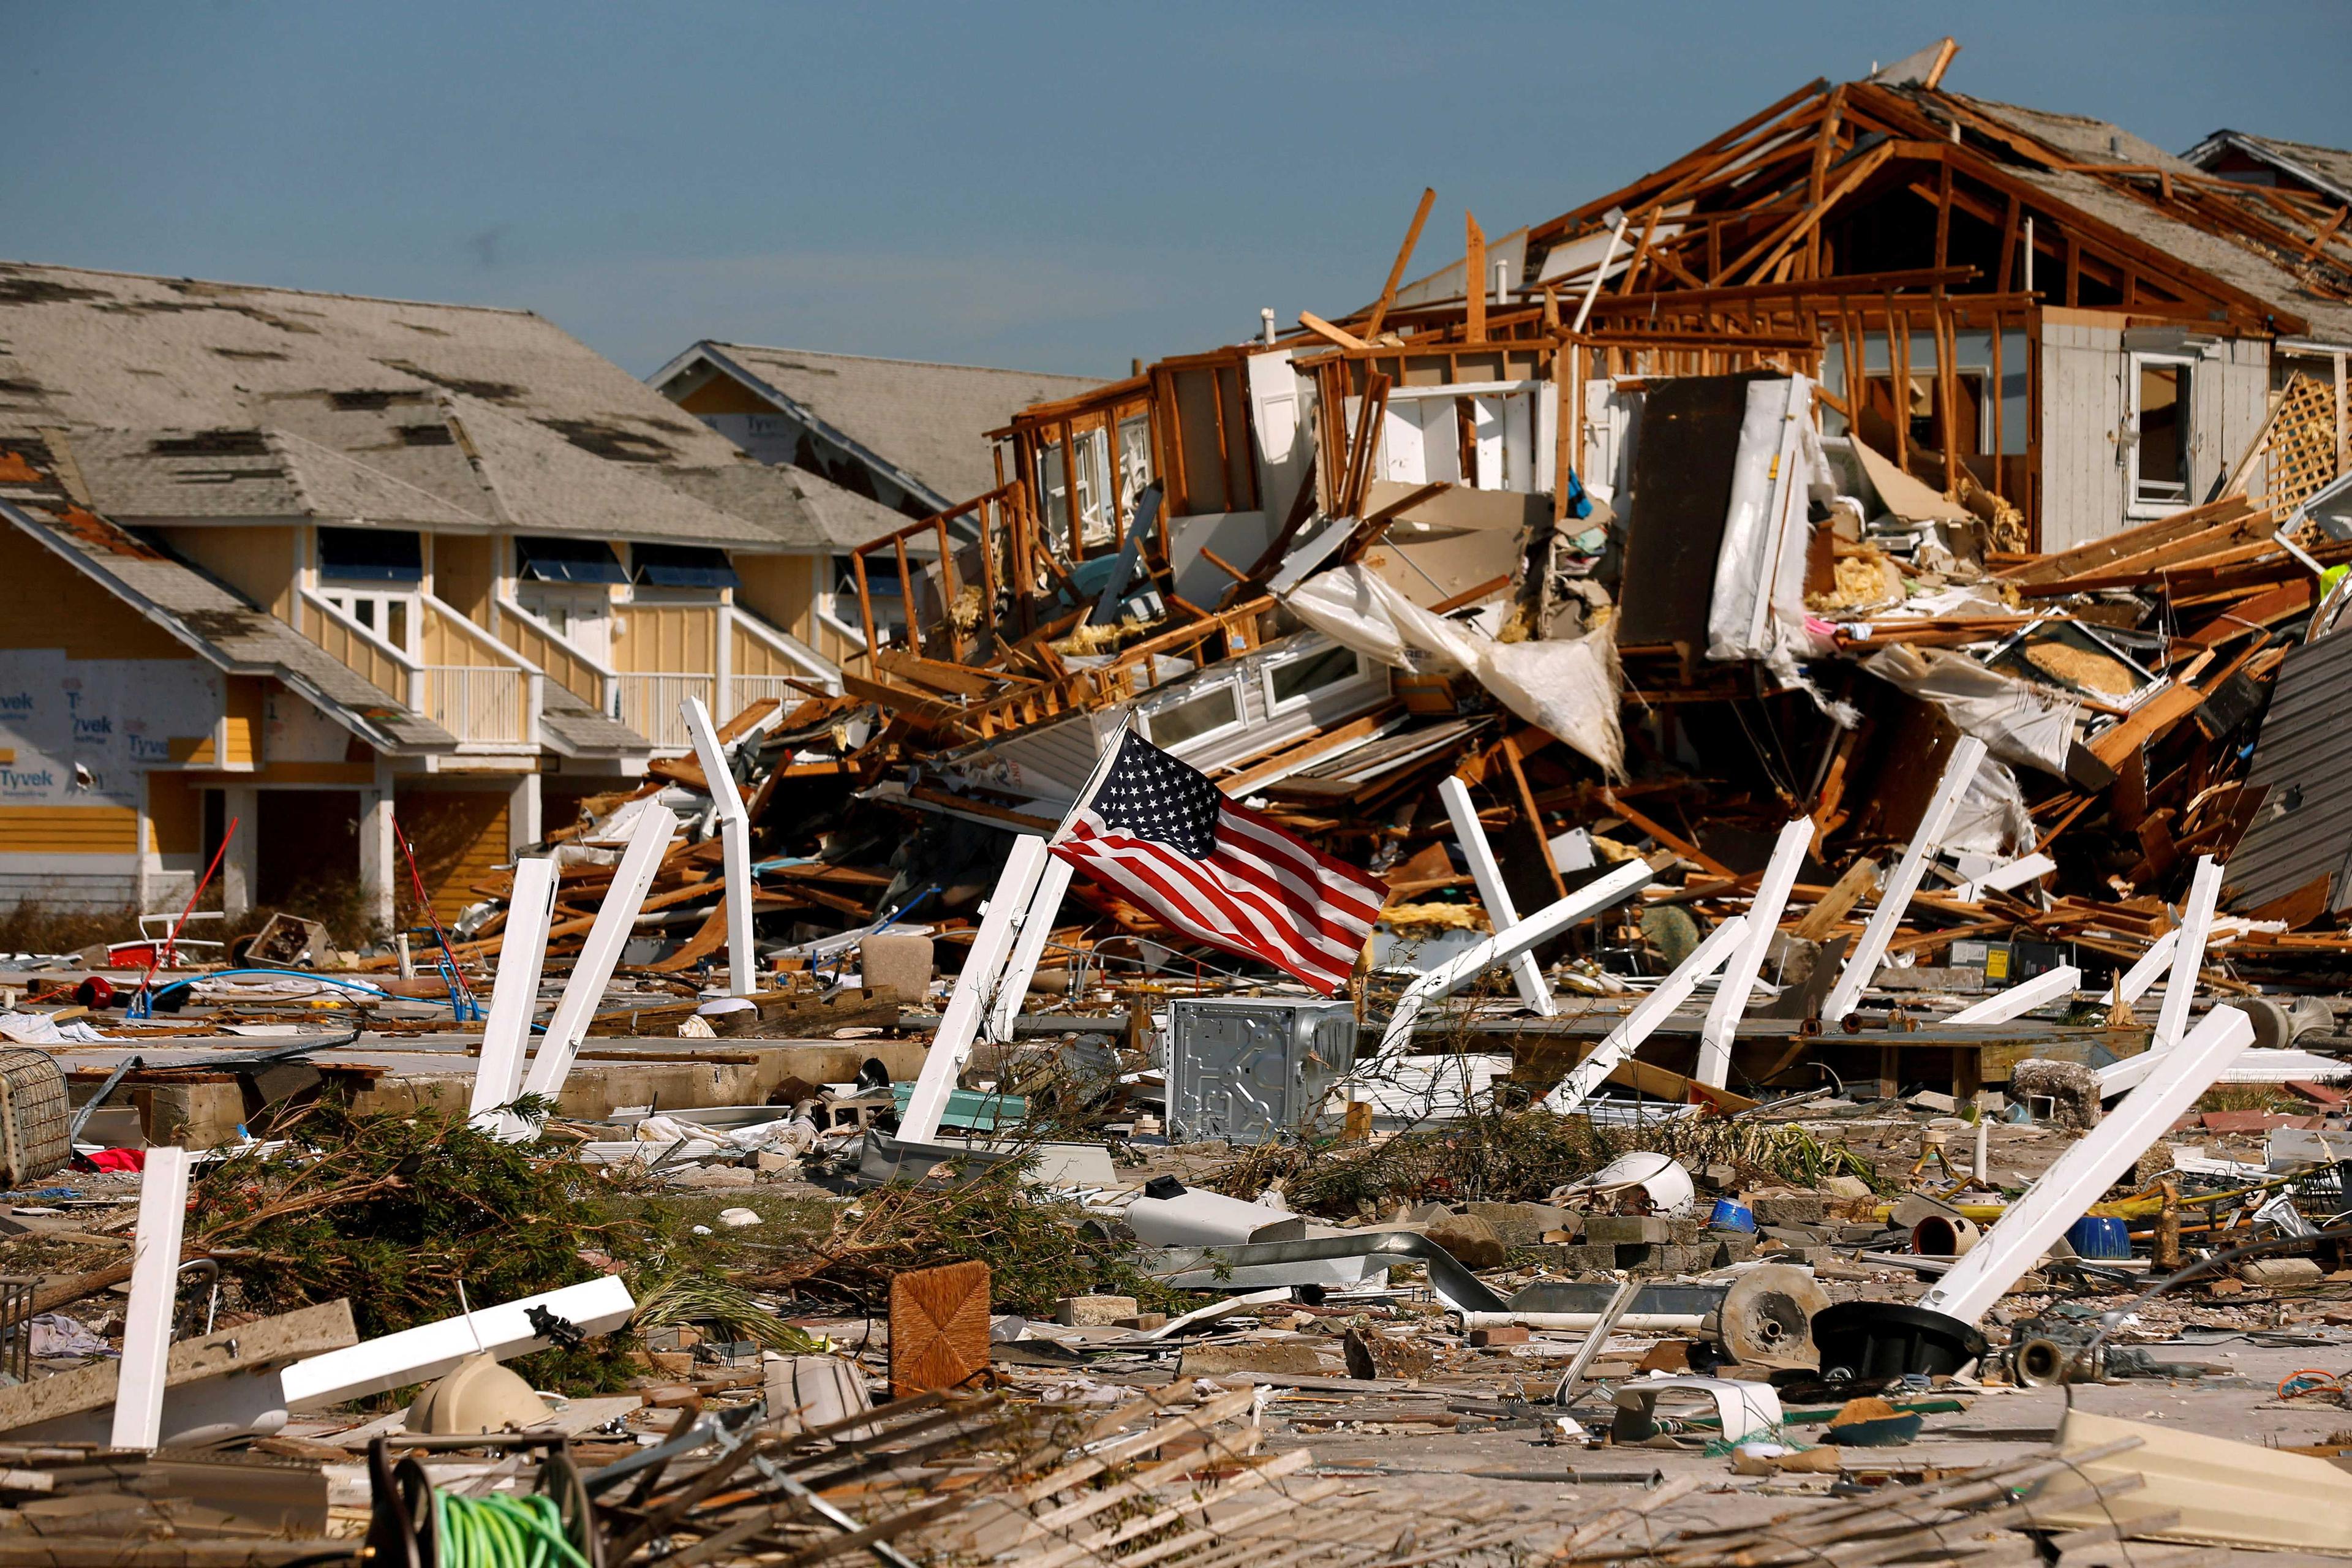 An American flag flies amongst rubble left in the aftermath of Hurricane Michael in Mexico Beach, Florida, US Oct 11. Photo: Reuters